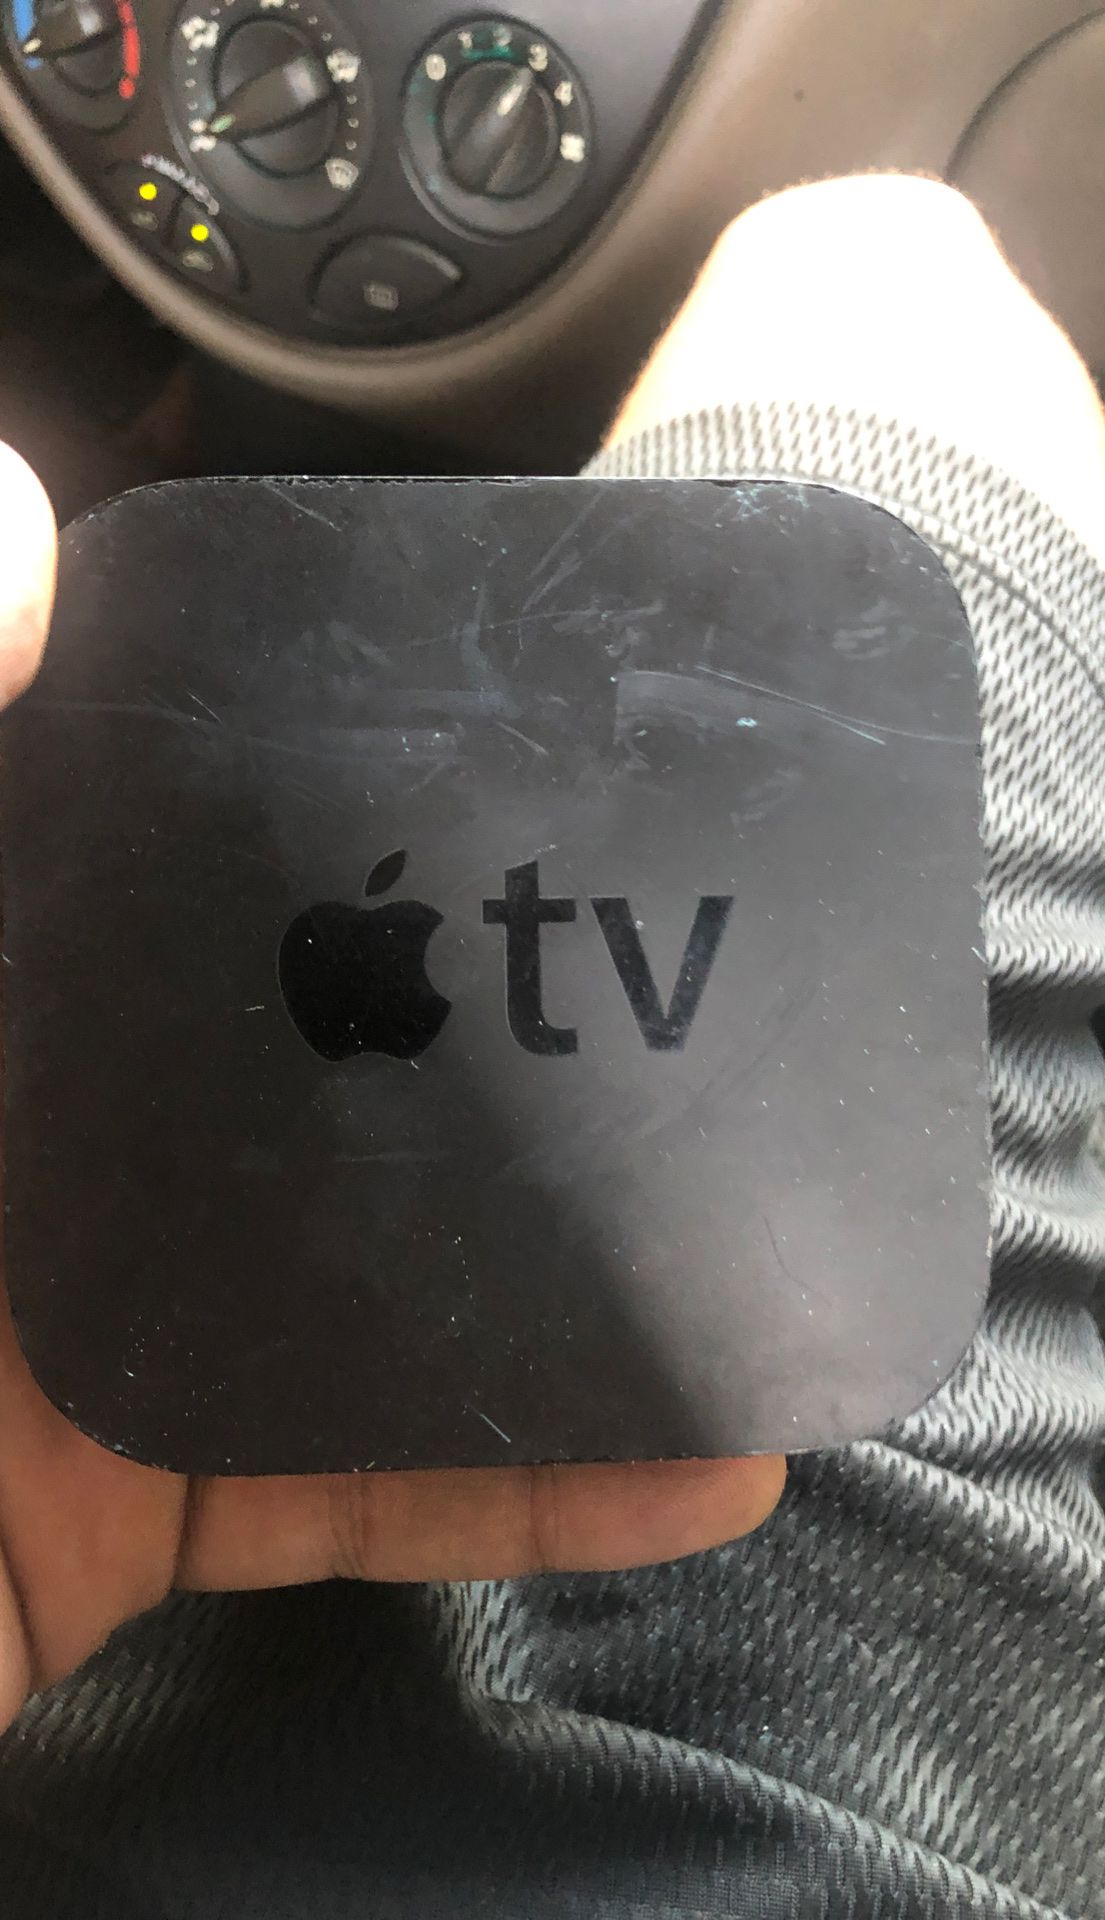 Apple TV 3rd Generation 2012 w/ Remote and Cords